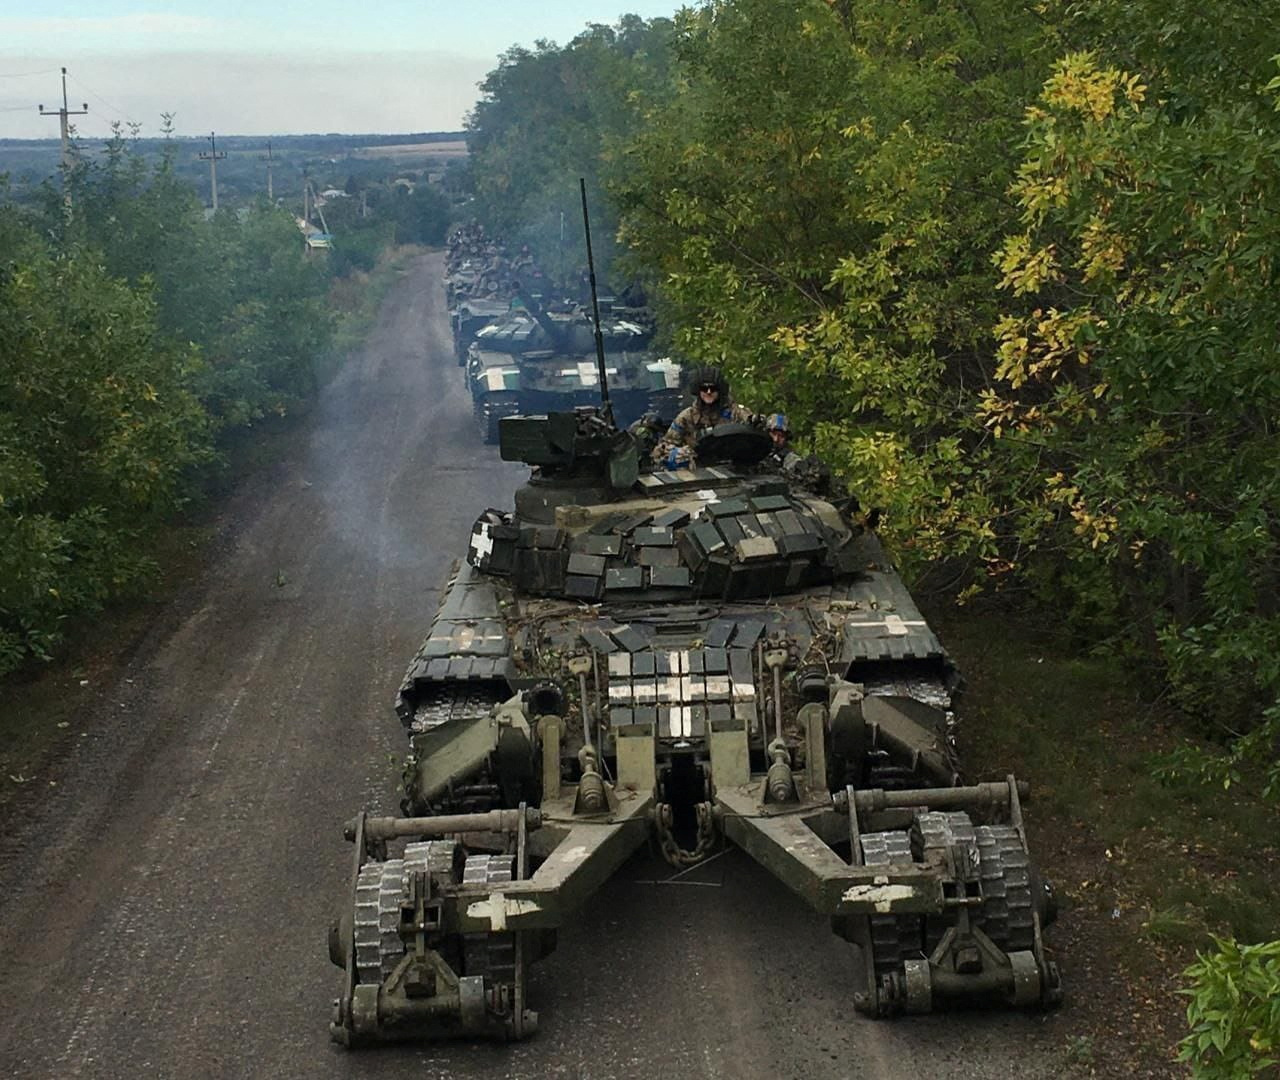 PHOTO: Ukrainian service members ride on tanks during a counteroffensive operation, amid Russia's attack on Ukraine, in Kharkiv region, Ukraine, in this handout picture released Sept. 12, 2022.